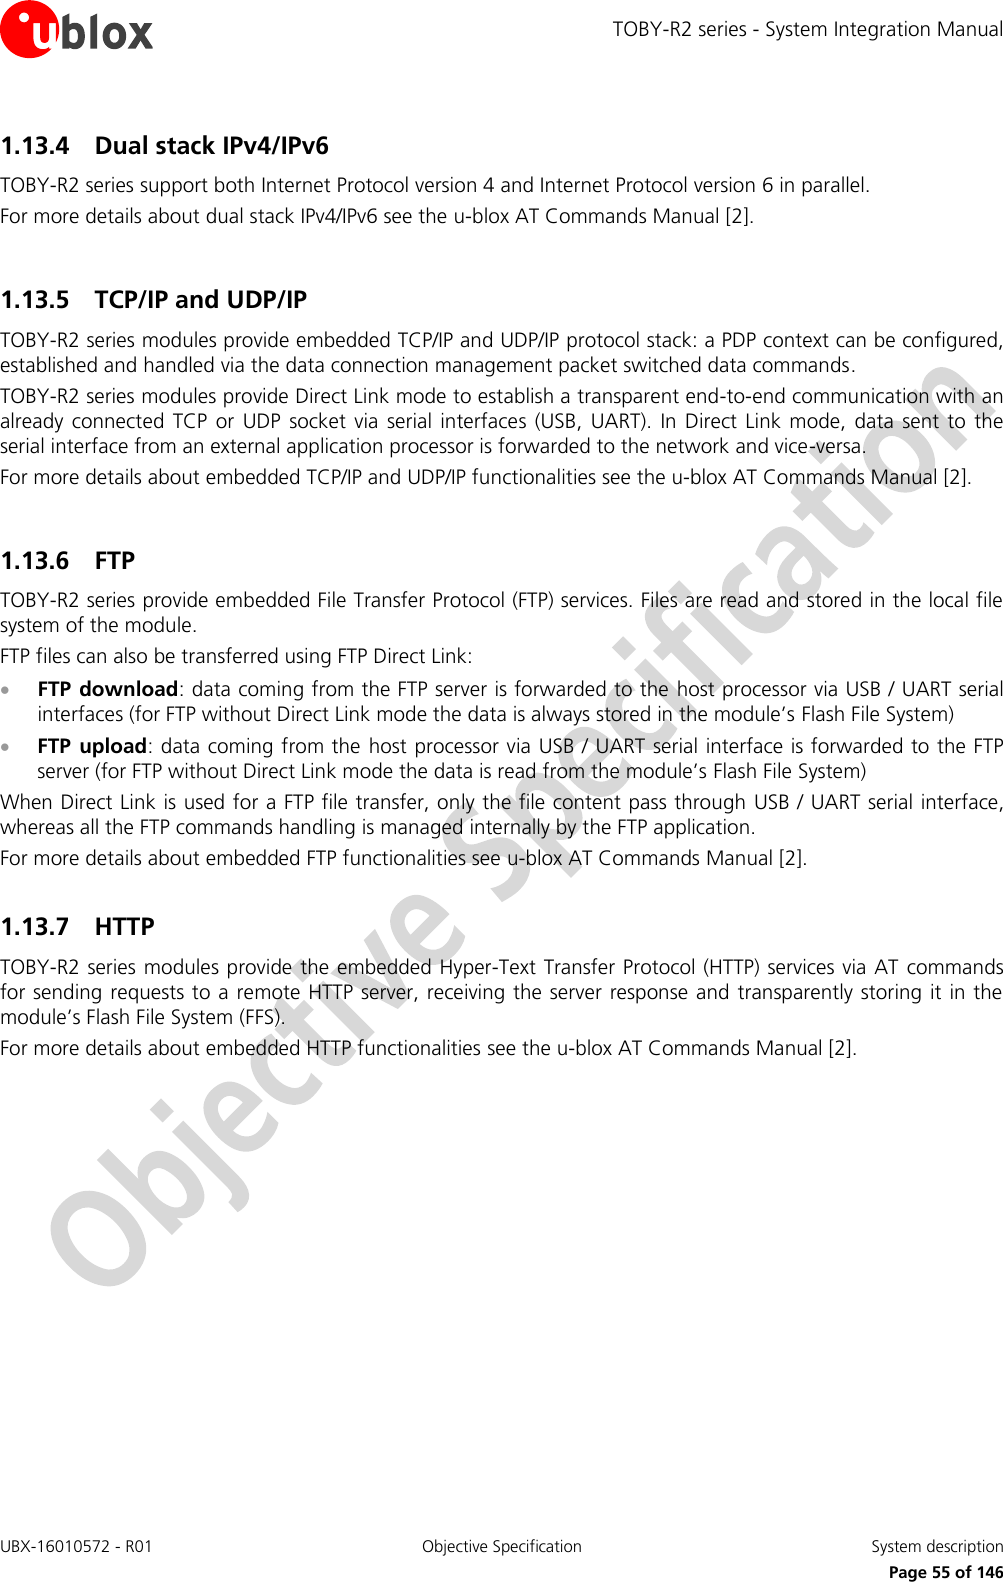 TOBY-R2 series - System Integration Manual UBX-16010572 - R01  Objective Specification  System description     Page 55 of 146 1.13.4 Dual stack IPv4/IPv6 TOBY-R2 series support both Internet Protocol version 4 and Internet Protocol version 6 in parallel. For more details about dual stack IPv4/IPv6 see the u-blox AT Commands Manual [2].  1.13.5 TCP/IP and UDP/IP TOBY-R2 series modules provide embedded TCP/IP and UDP/IP protocol stack: a PDP context can be configured, established and handled via the data connection management packet switched data commands.  TOBY-R2 series modules provide Direct Link mode to establish a transparent end-to-end communication with an already  connected  TCP  or  UDP  socket via serial  interfaces  (USB,  UART).  In Direct  Link mode,  data sent  to  the serial interface from an external application processor is forwarded to the network and vice-versa. For more details about embedded TCP/IP and UDP/IP functionalities see the u-blox AT Commands Manual [2].  1.13.6 FTP  TOBY-R2 series provide embedded File Transfer Protocol (FTP) services. Files are read and stored in the local file system of the module. FTP files can also be transferred using FTP Direct Link:  FTP download: data coming from the FTP server is forwarded to the host processor via USB / UART serial interfaces (for FTP without Direct Link mode the data is always stored in the module’s Flash File System)  FTP  upload: data coming from the  host processor via USB / UART serial interface is forwarded to the FTP server (for FTP without Direct Link mode the data is read from the module’s Flash File System) When Direct Link is used for a FTP file transfer, only the file content pass through  USB / UART serial interface, whereas all the FTP commands handling is managed internally by the FTP application. For more details about embedded FTP functionalities see u-blox AT Commands Manual [2].  1.13.7 HTTP  TOBY-R2 series modules provide the embedded Hyper-Text Transfer Protocol (HTTP) services via AT commands for sending requests to a remote HTTP server, receiving the server response and transparently storing it in the module’s Flash File System (FFS).  For more details about embedded HTTP functionalities see the u-blox AT Commands Manual [2].  